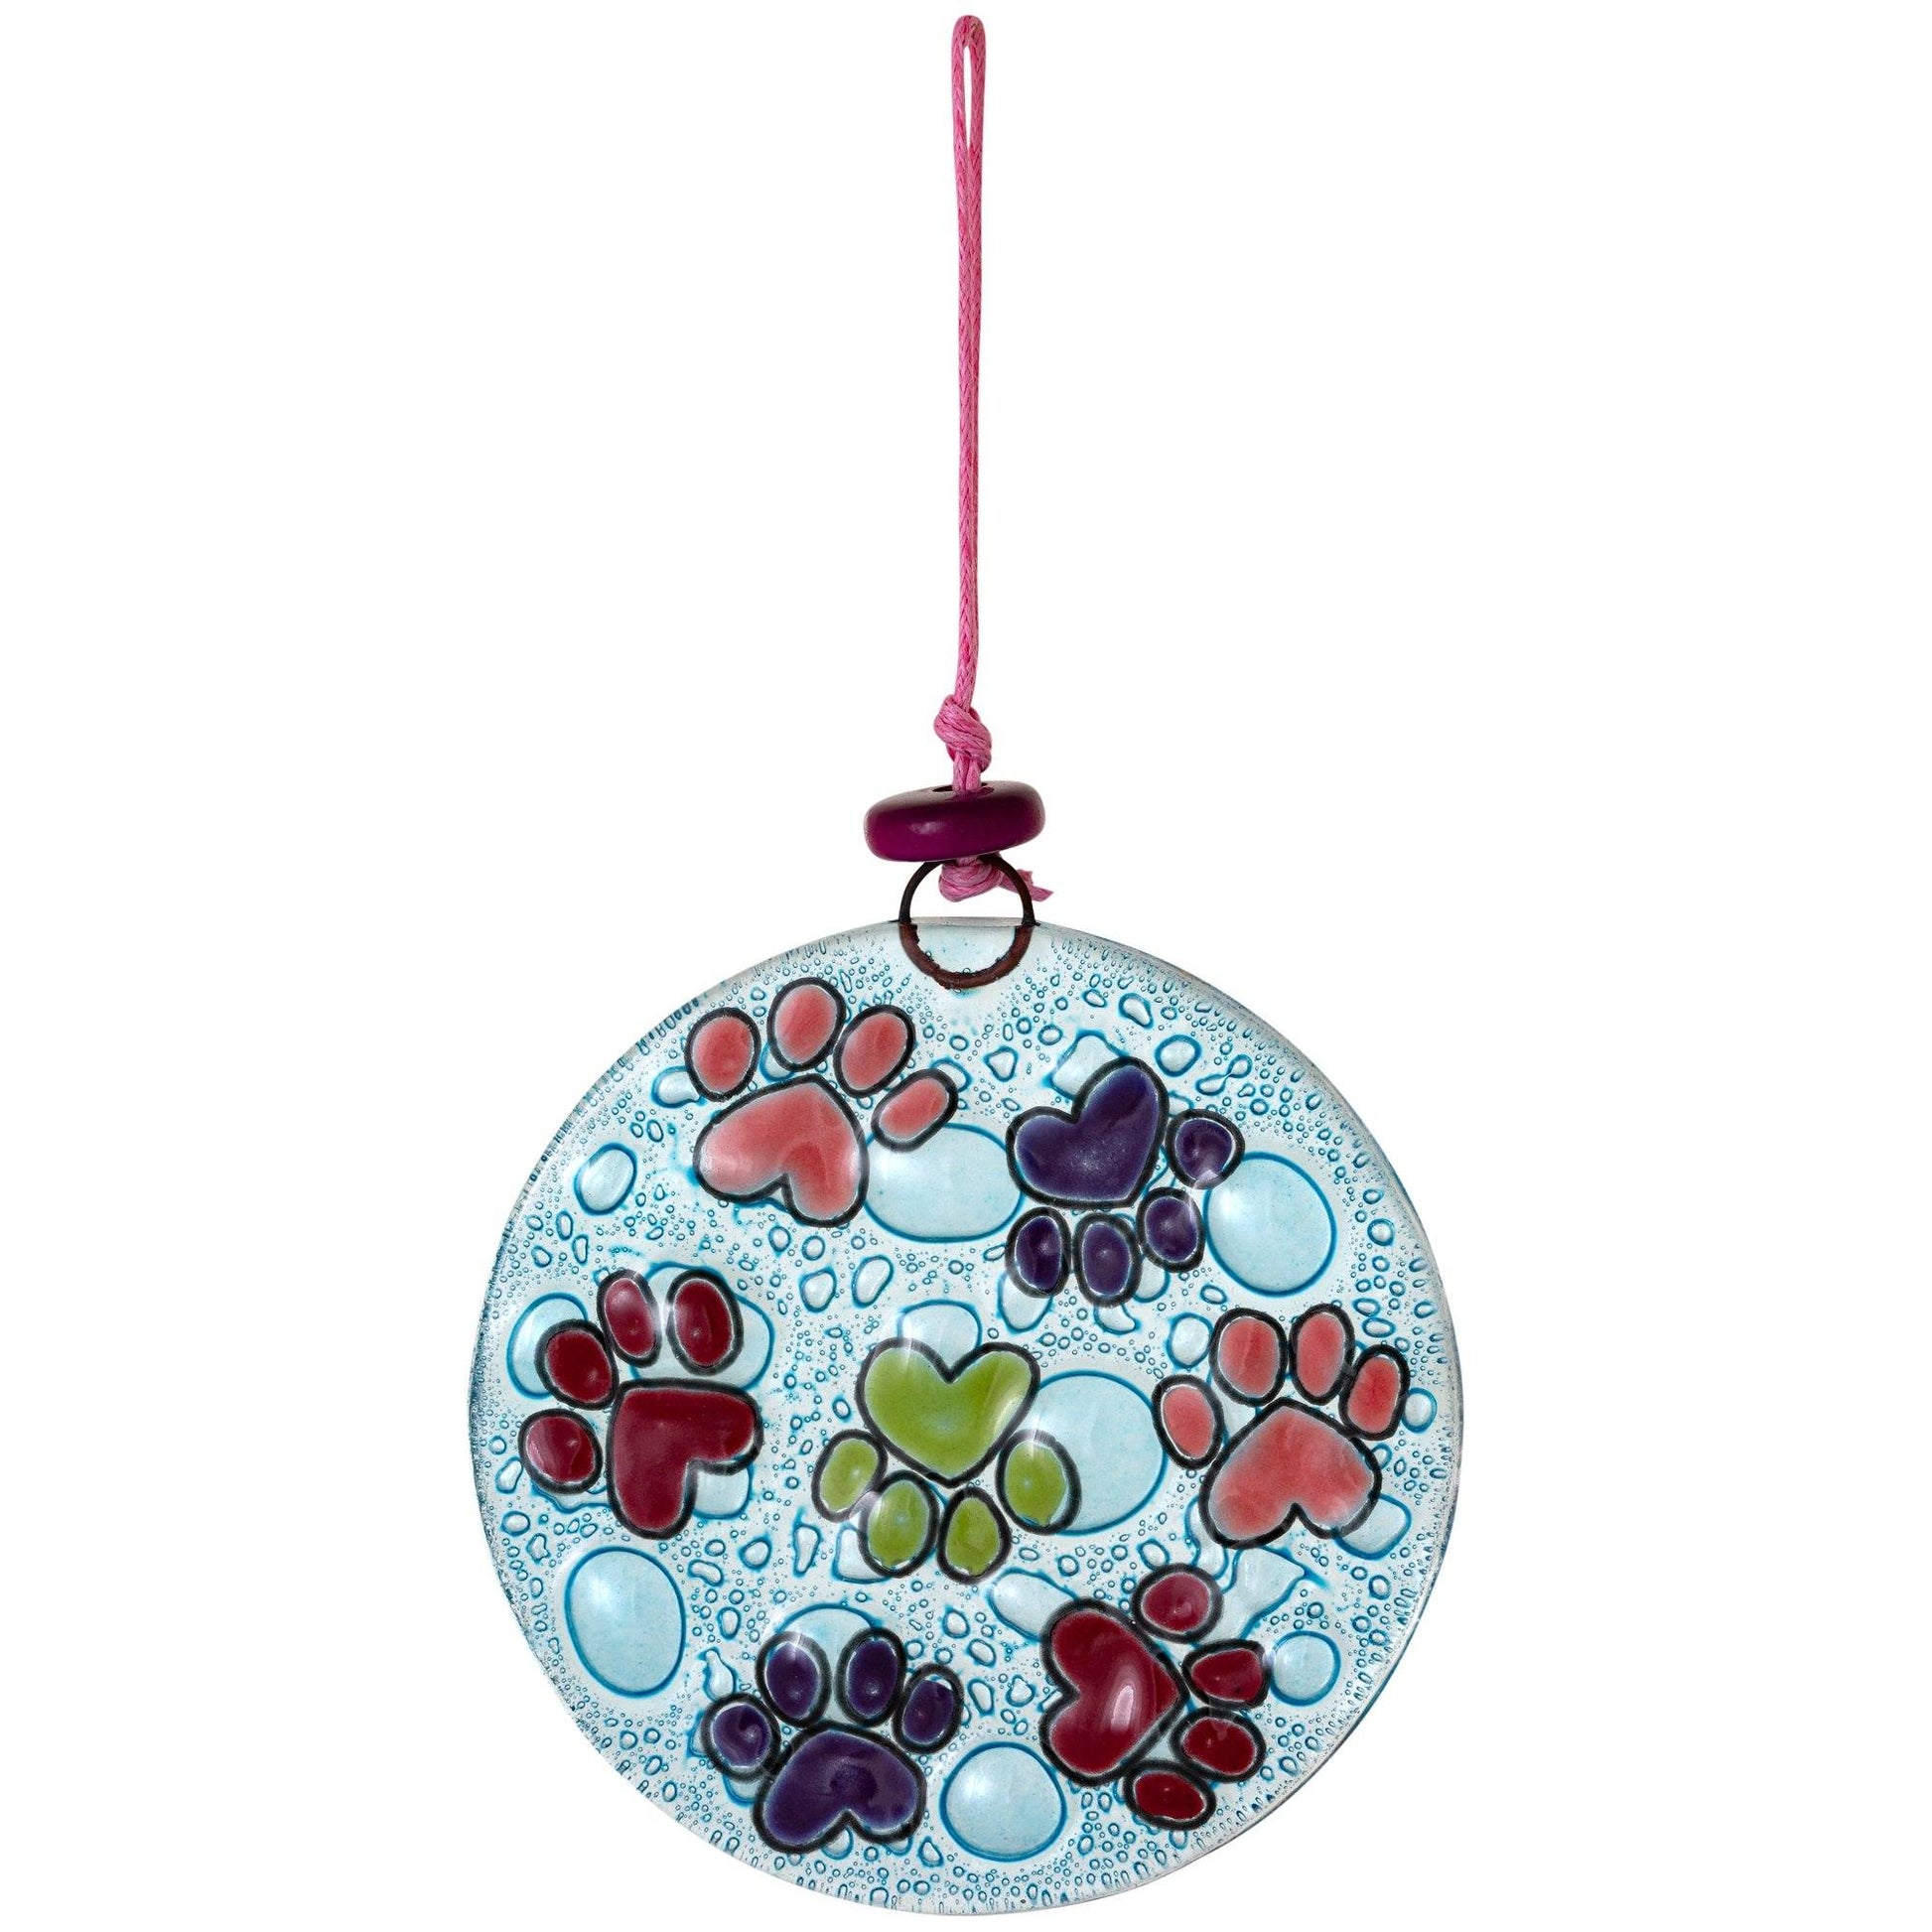 Whiskers & Paws Recycled Glass Ornament